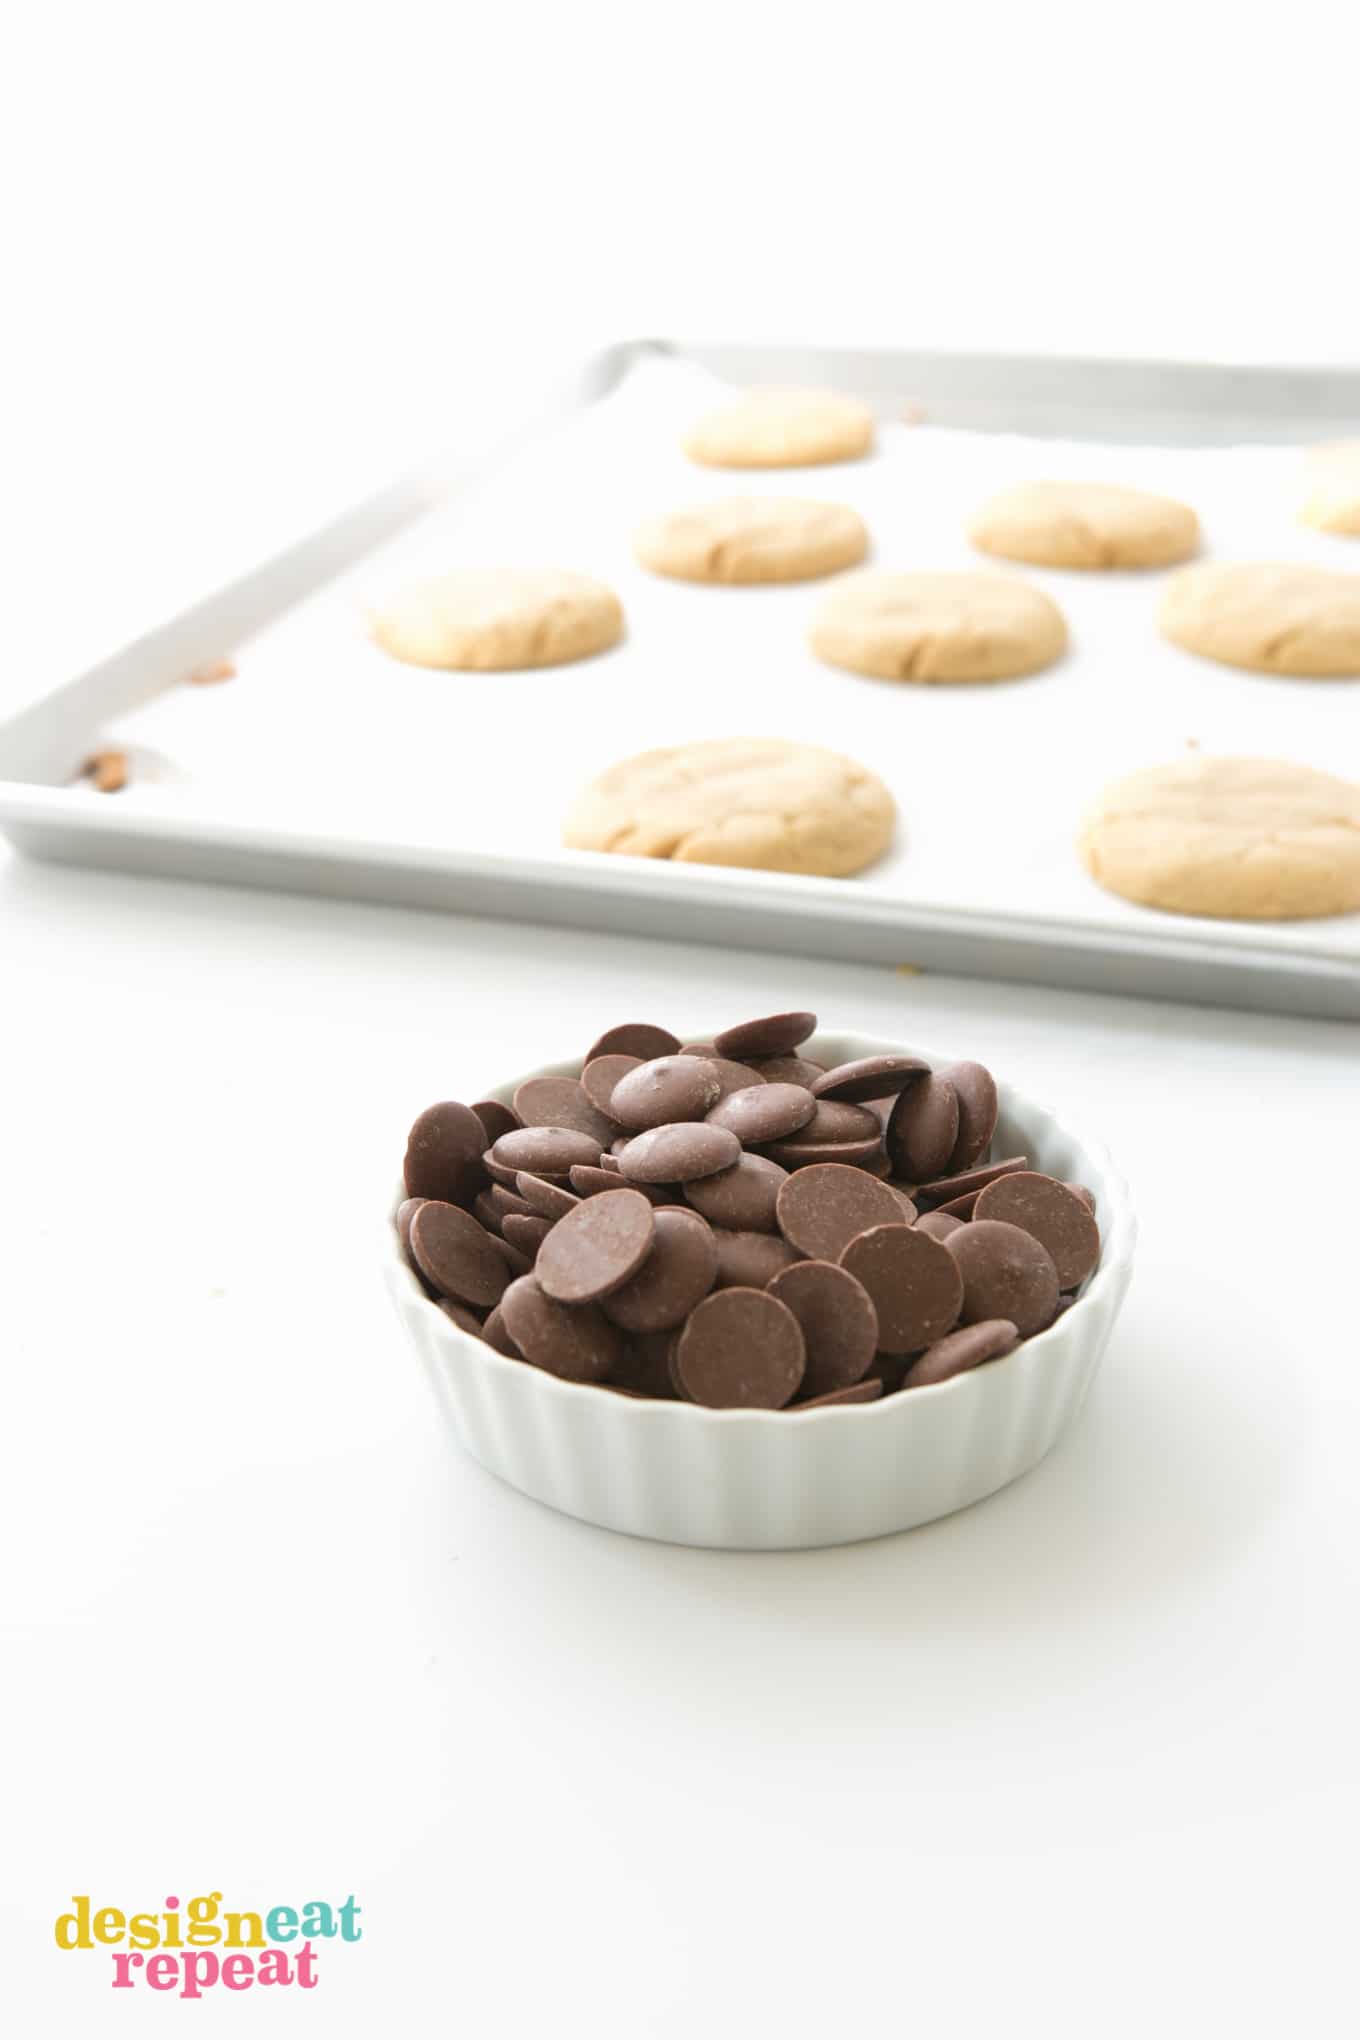 Bowl of dark chocolate melting wafers to use on peanut butter cookies.